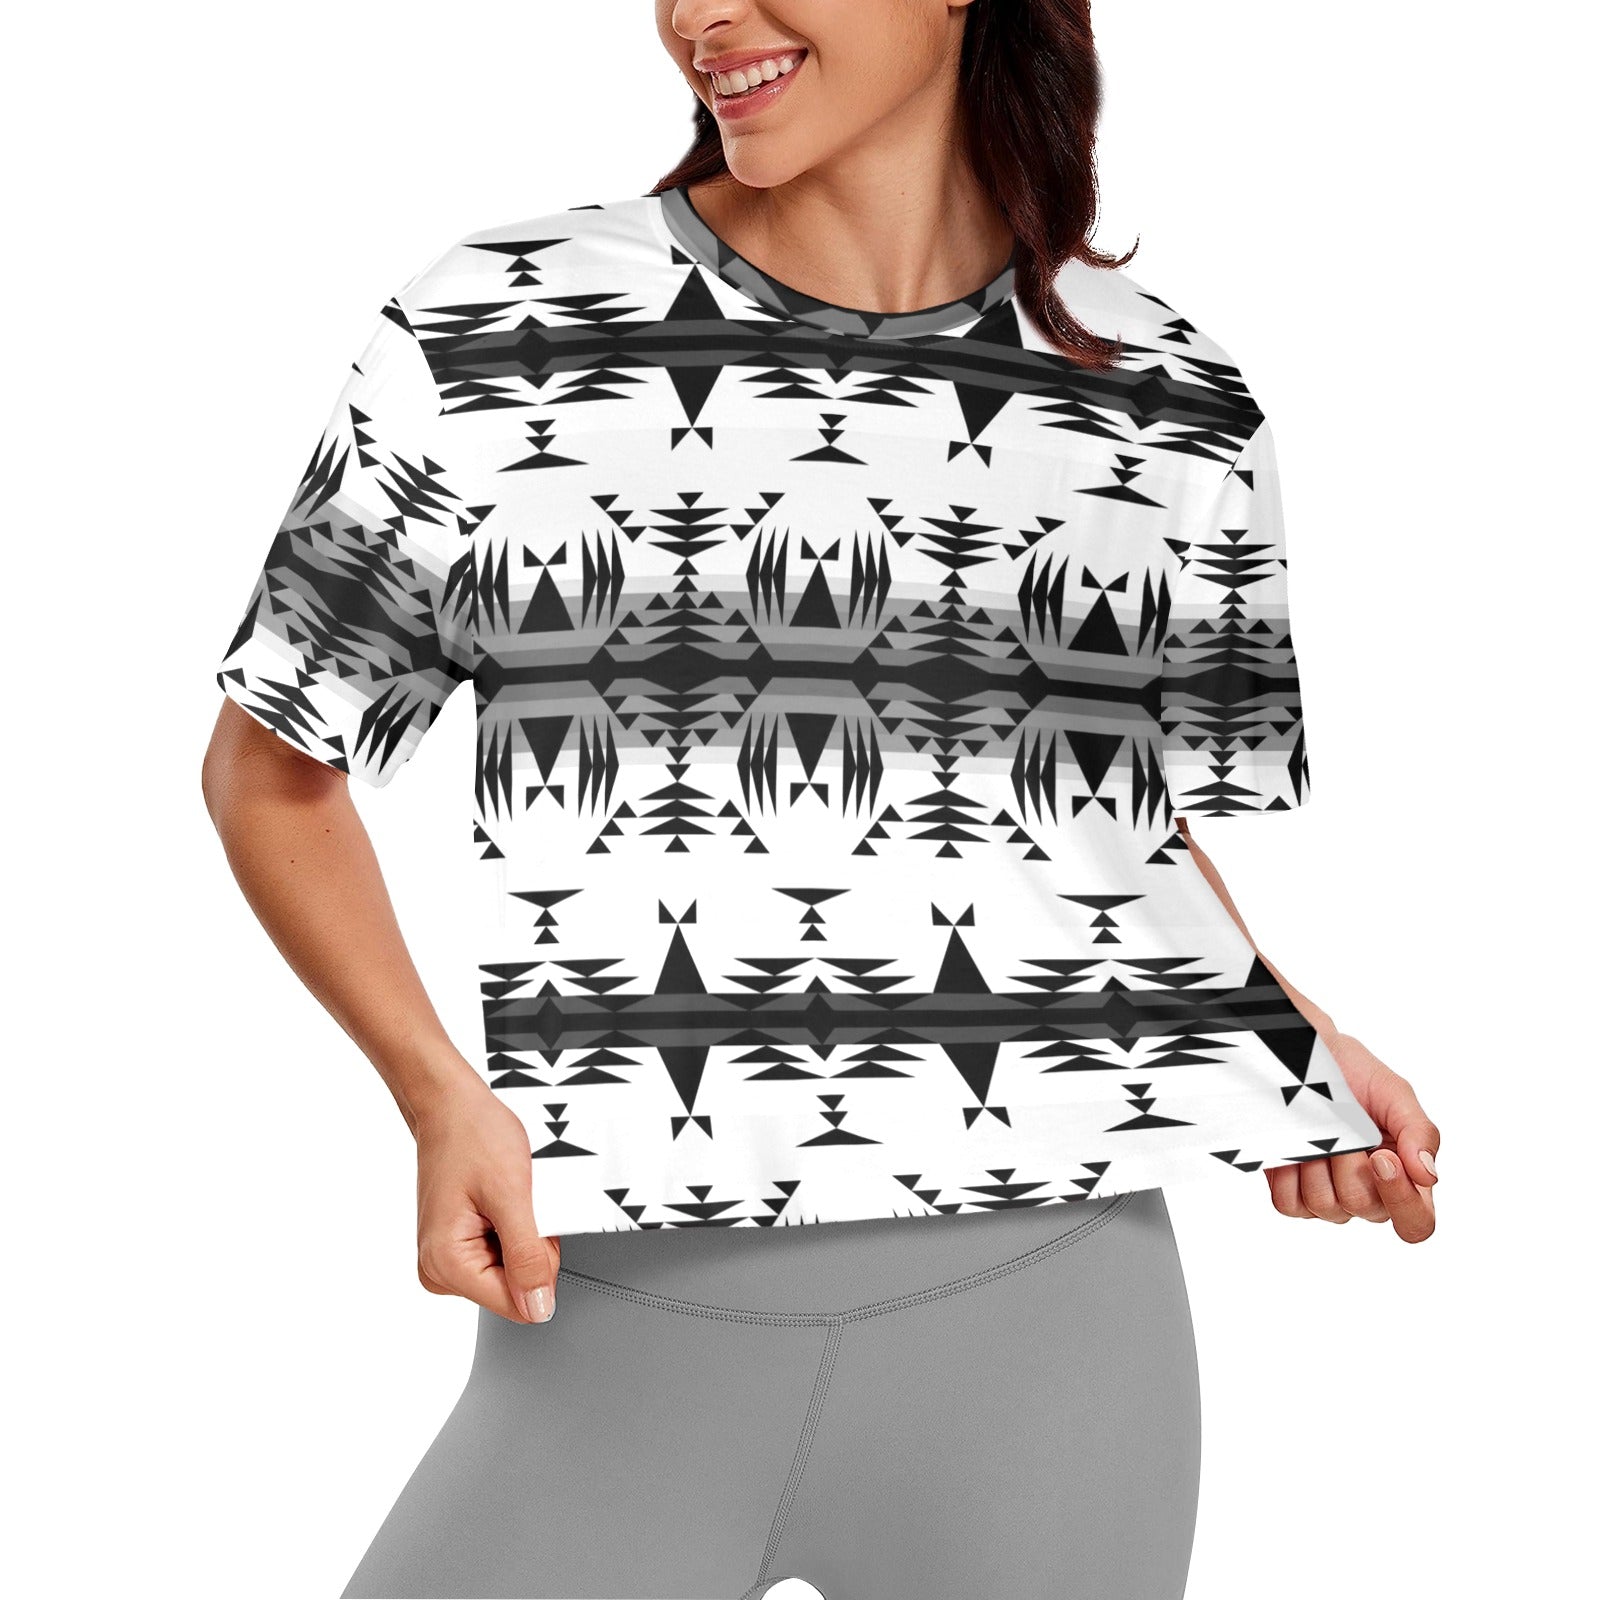 Between the Mountains White and Black Women's Cropped T-shirt